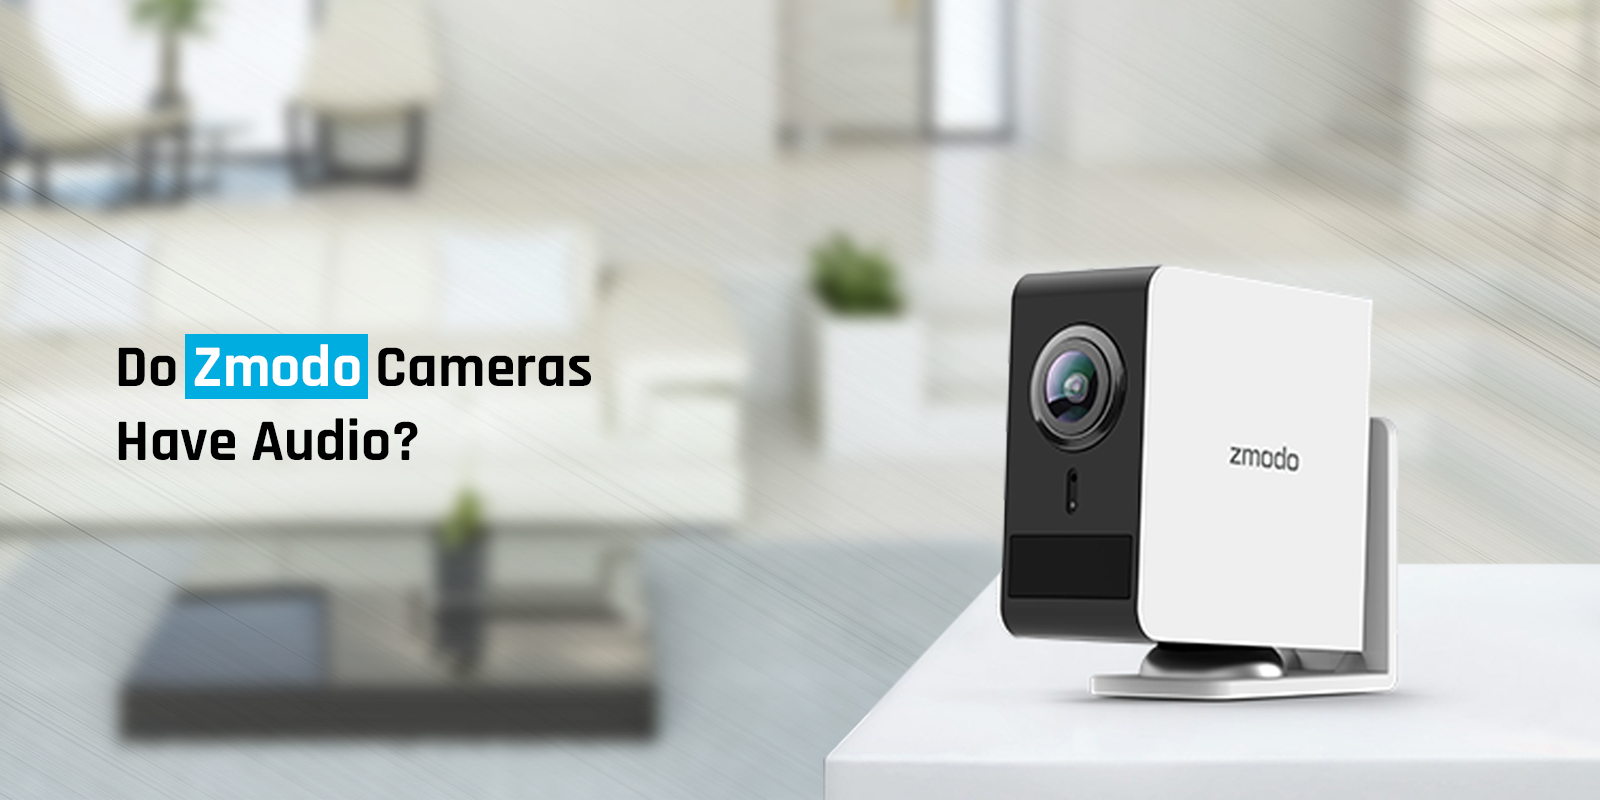 Do Zmodo Cameras Have Audio? Here’s What You Need to know